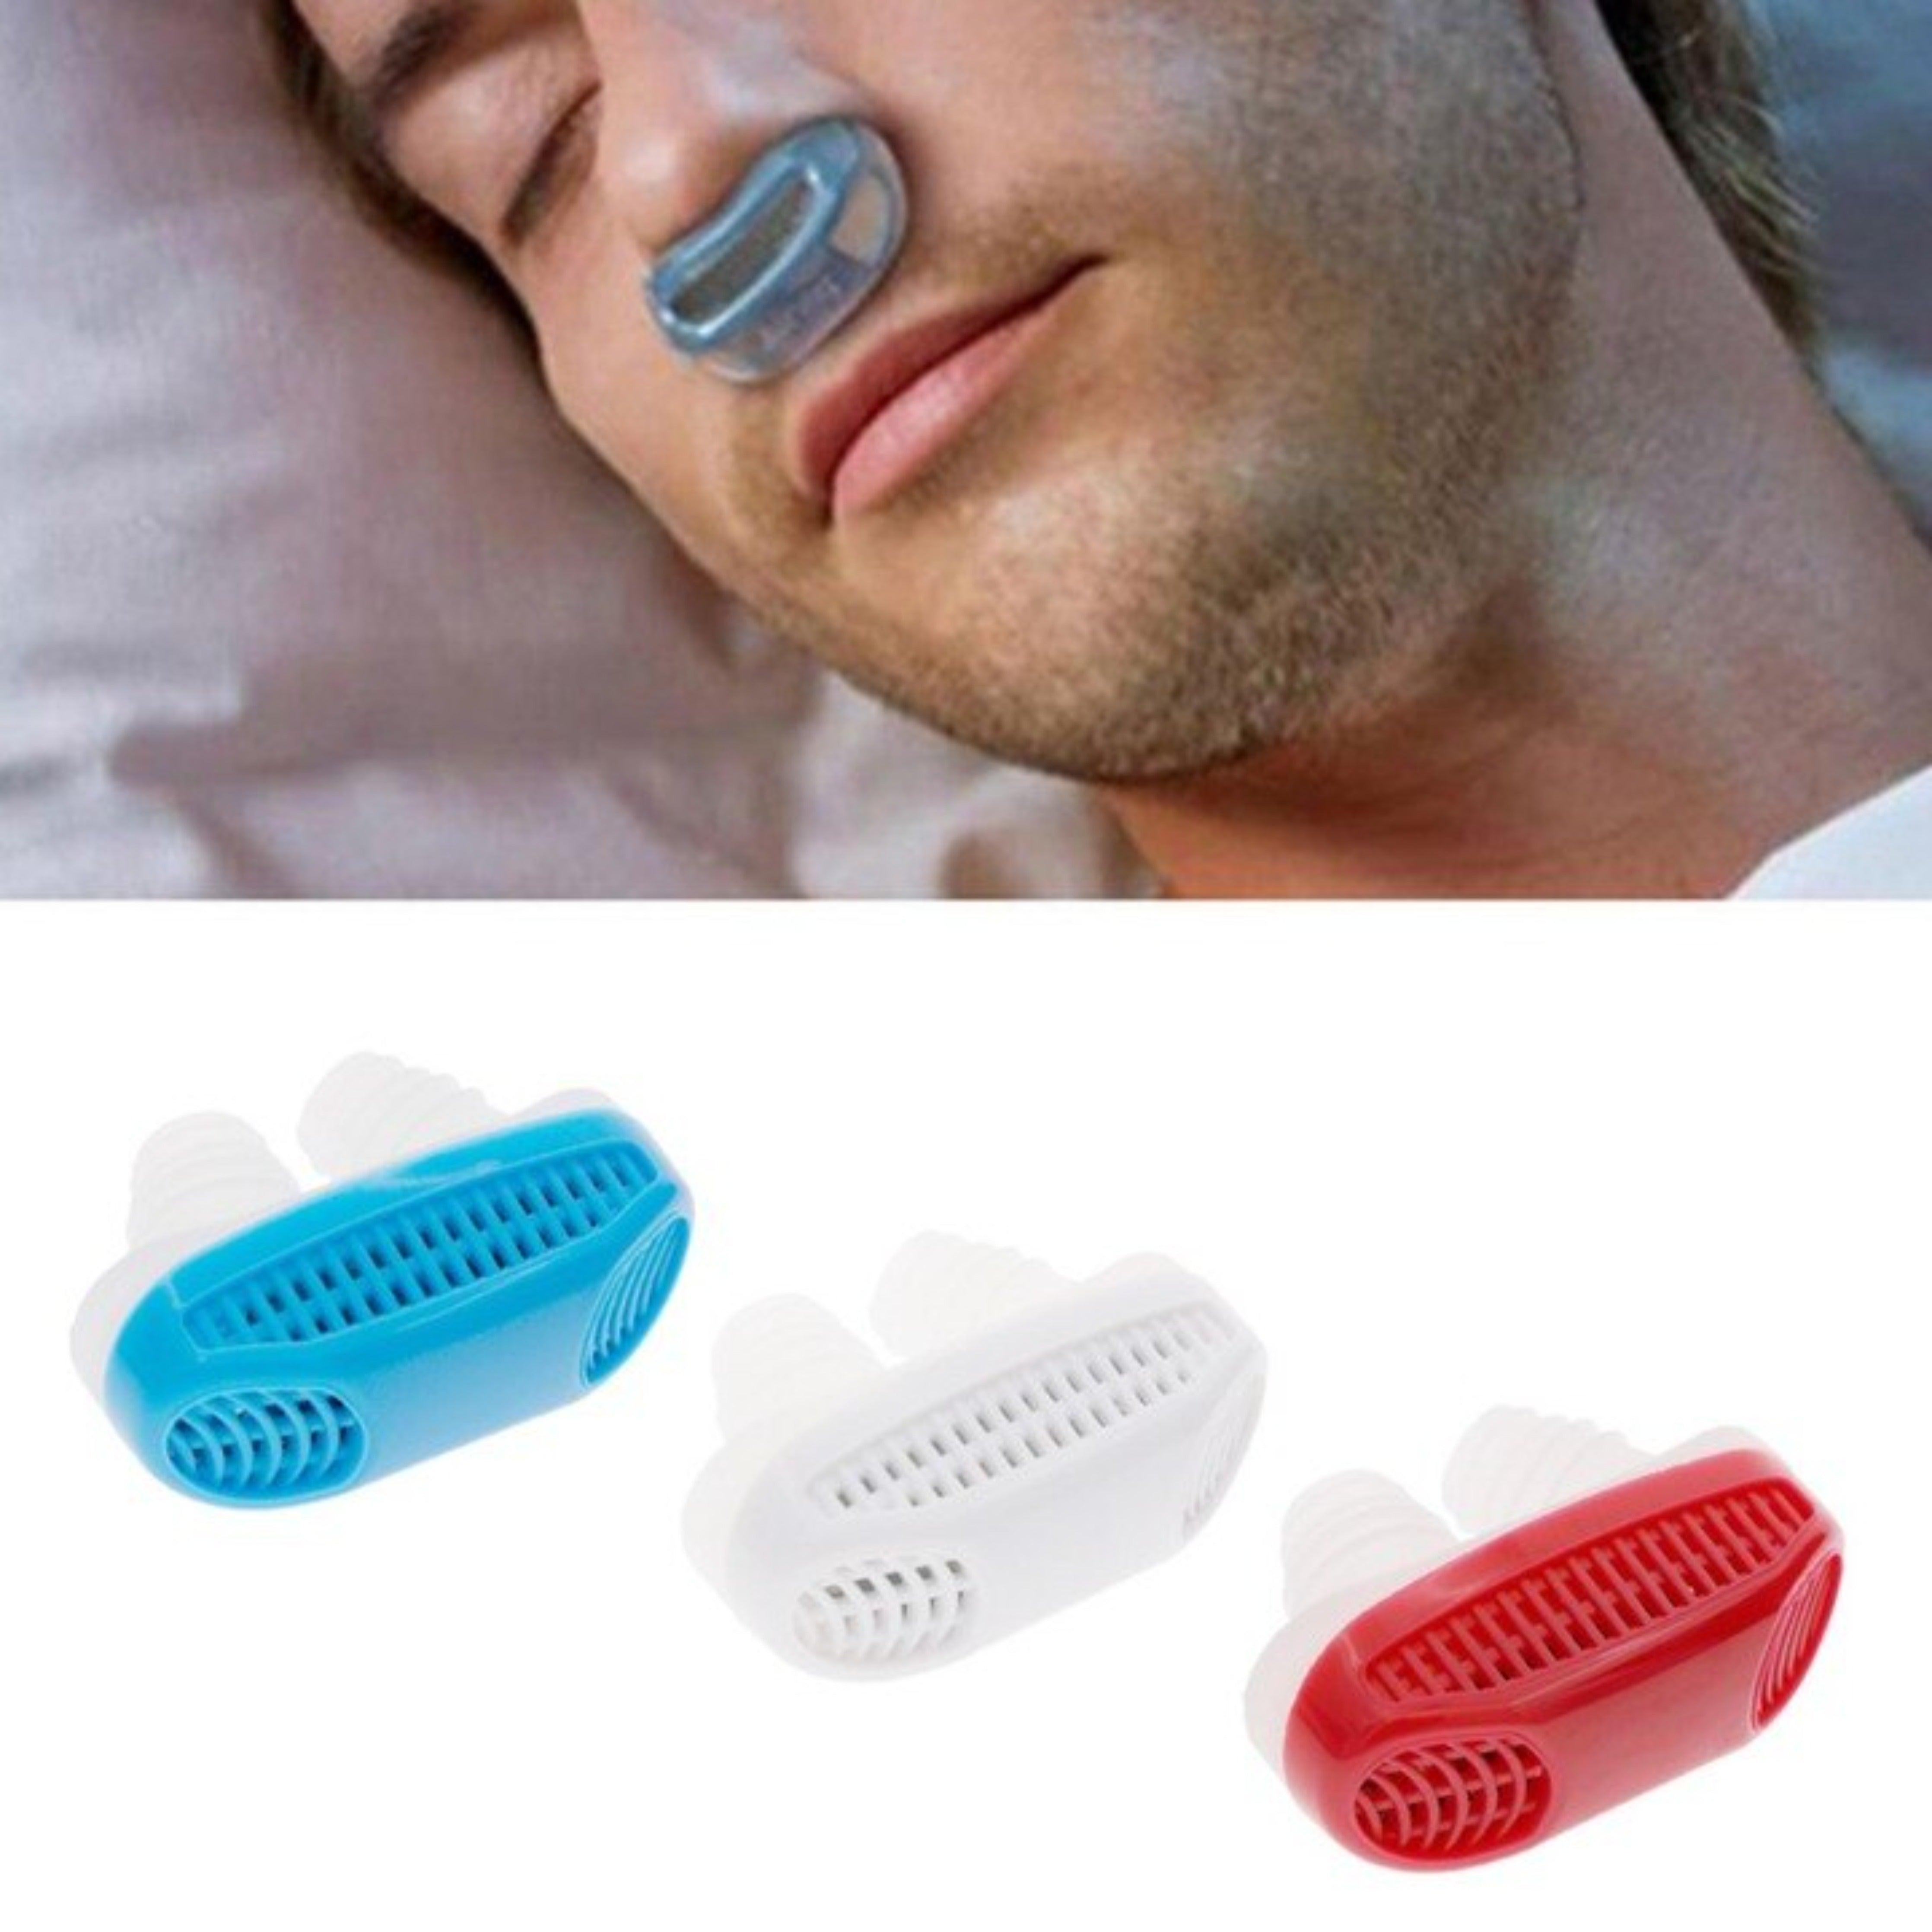 Airing Micro Cpap The First Hoseless Maskless 4906